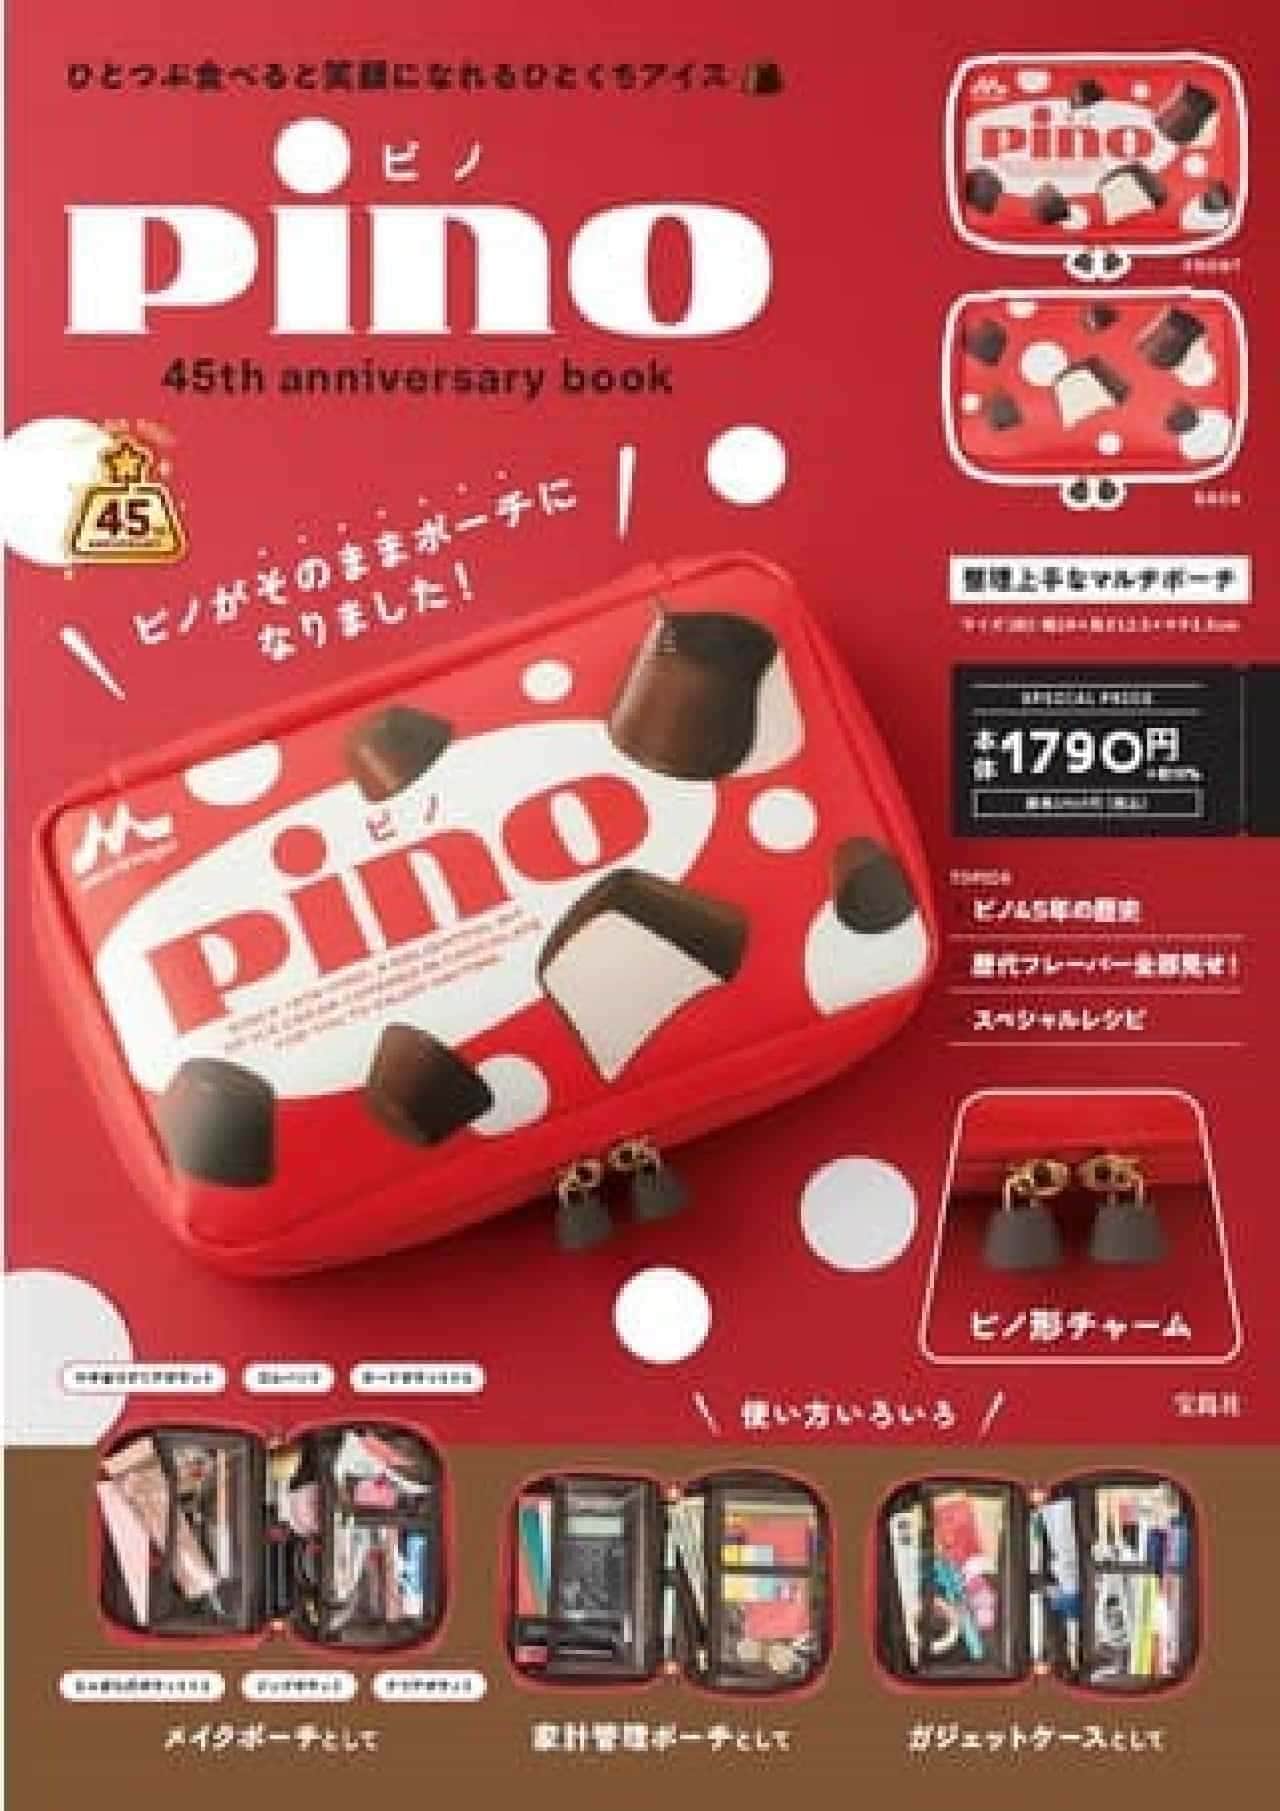 pino 45th anniversary book" at Seven-Eleven and other stores -- Official Pino Brand Book! Comes with a cute multi-pouch!